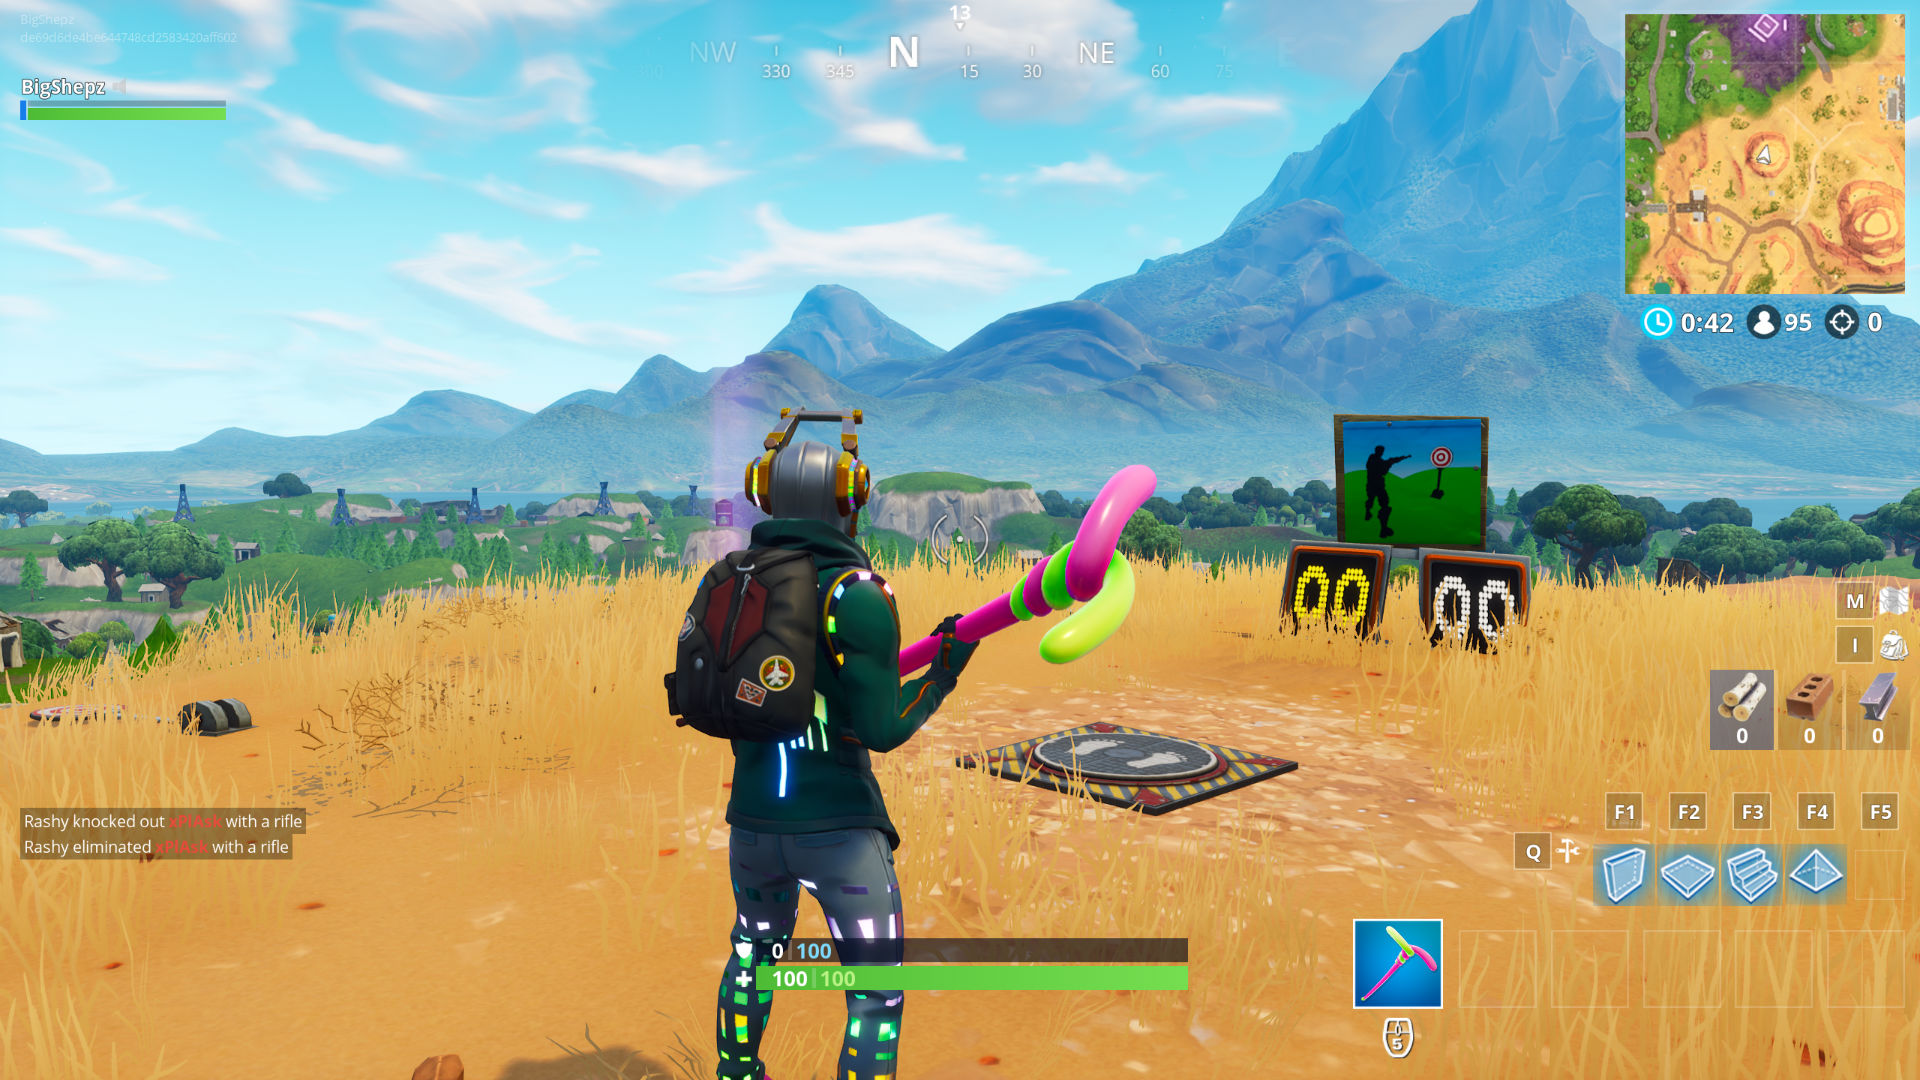 all fortnite shooting galleries locations paradise palms - fortnite shooting gallery locations paradise